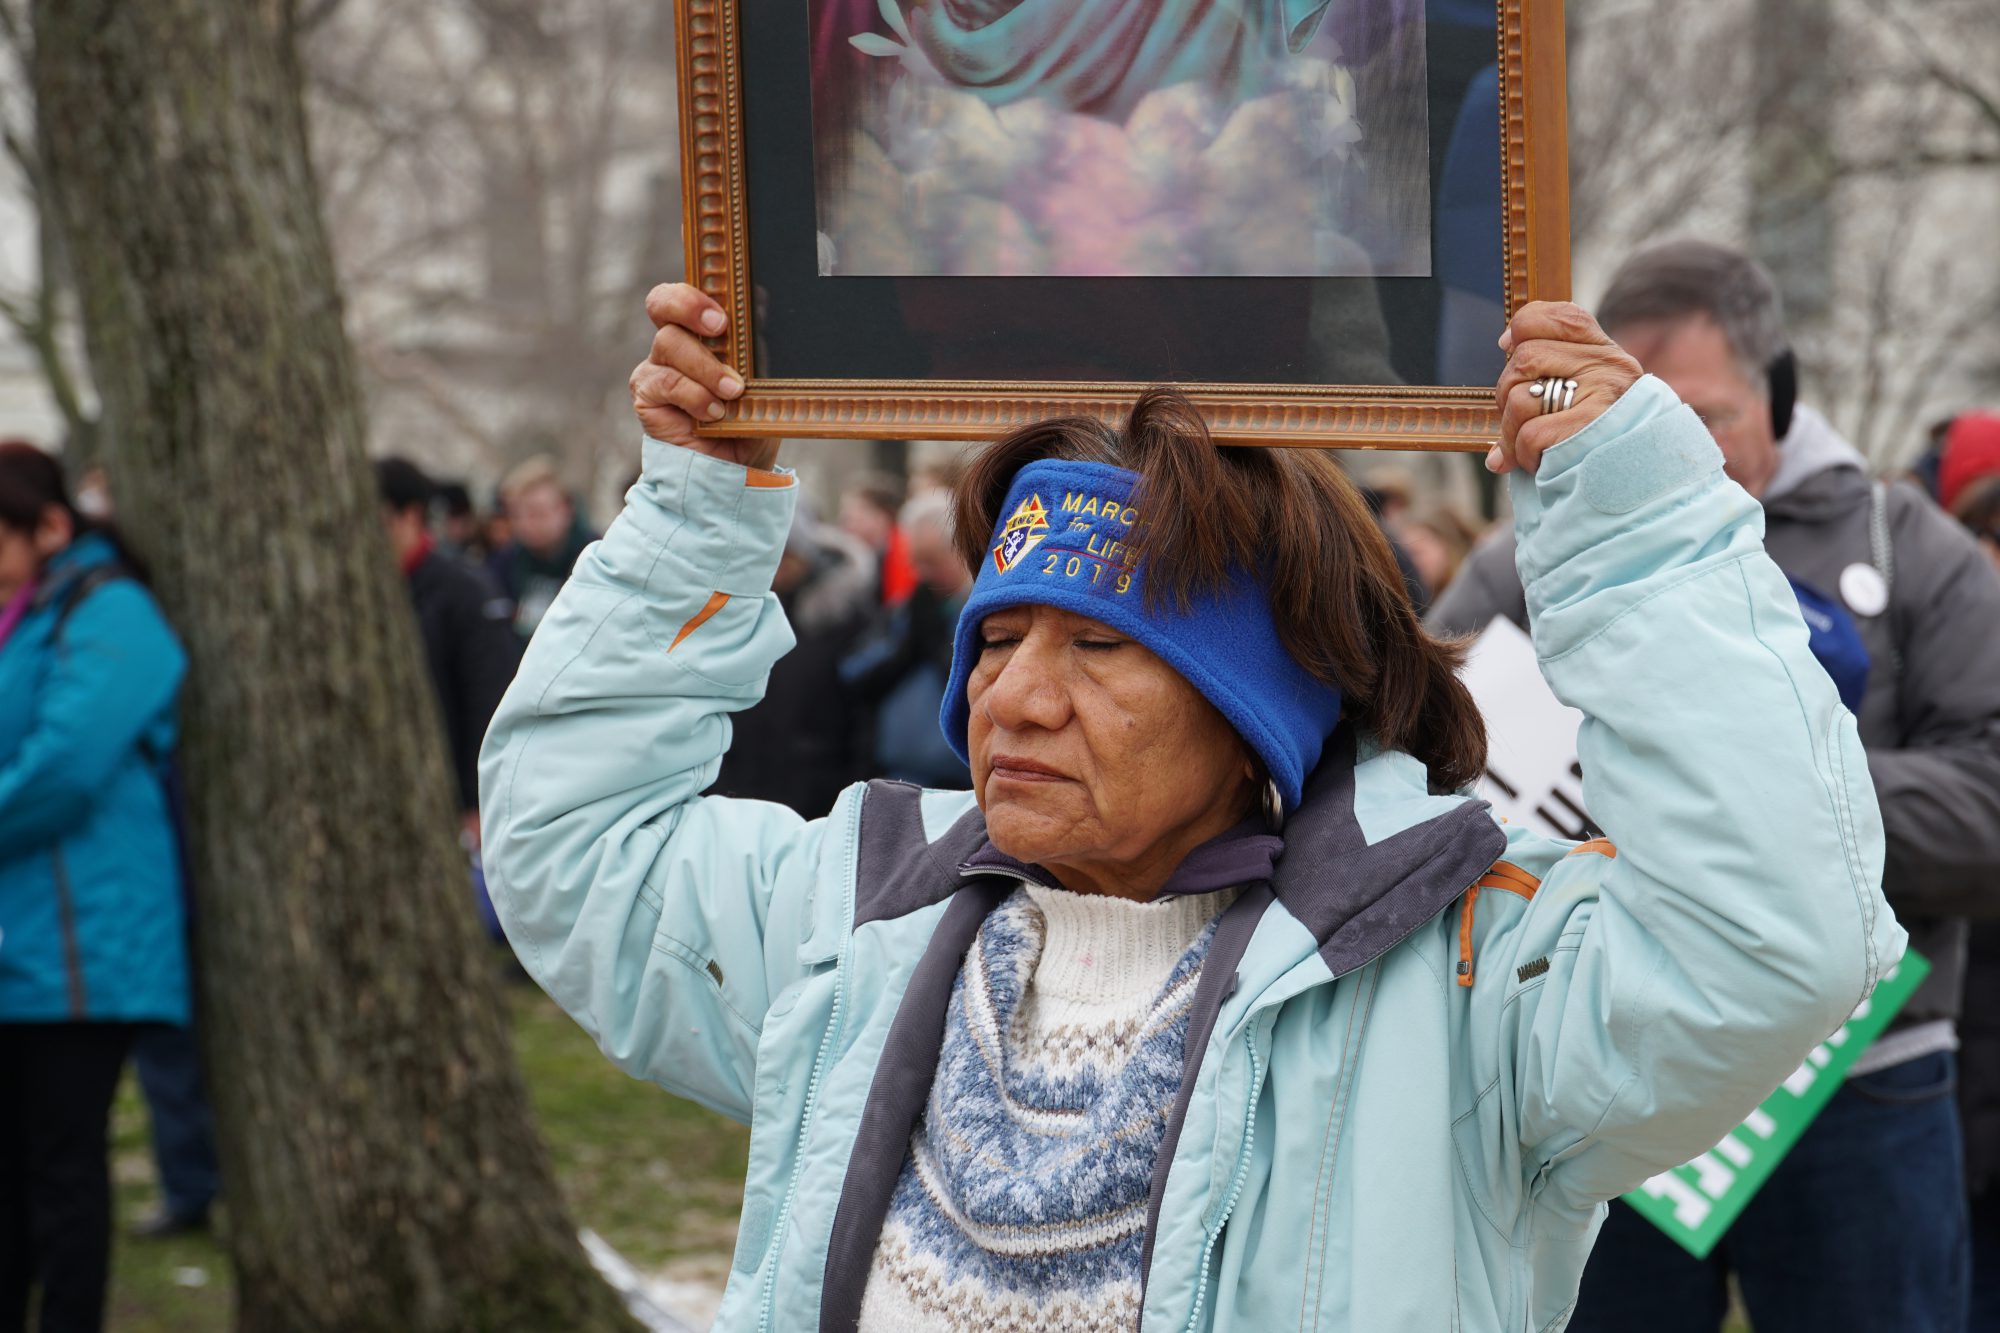 A woman holds up an image of Jesus during the prayer. (Ester Wells/MNS)